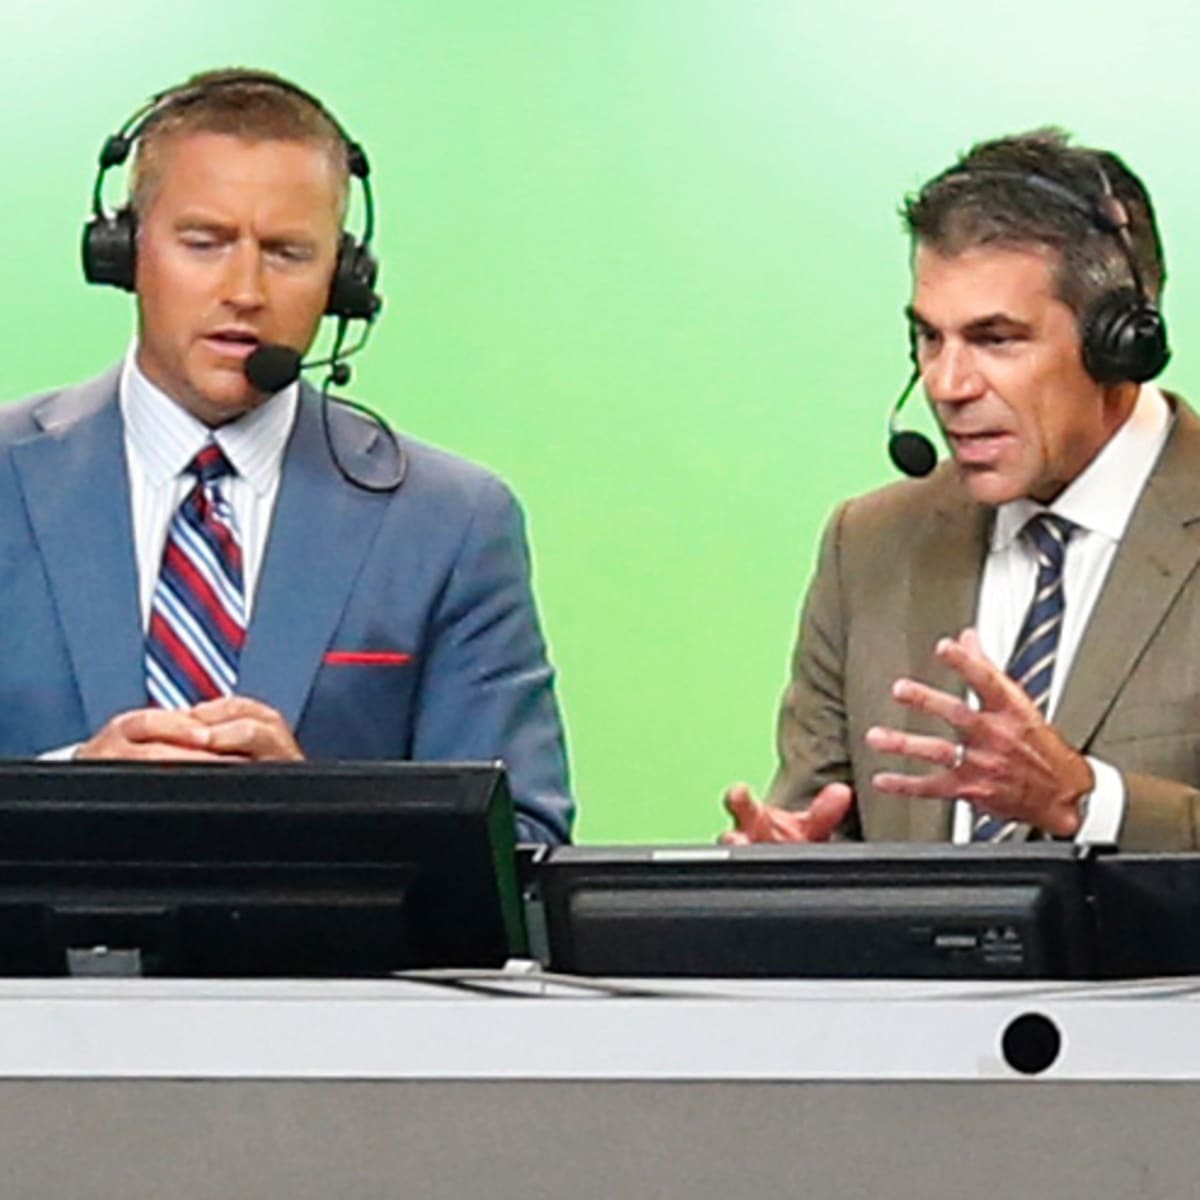 Monday Night Football' viewers call out ESPN over use of split screen -  Sports Illustrated